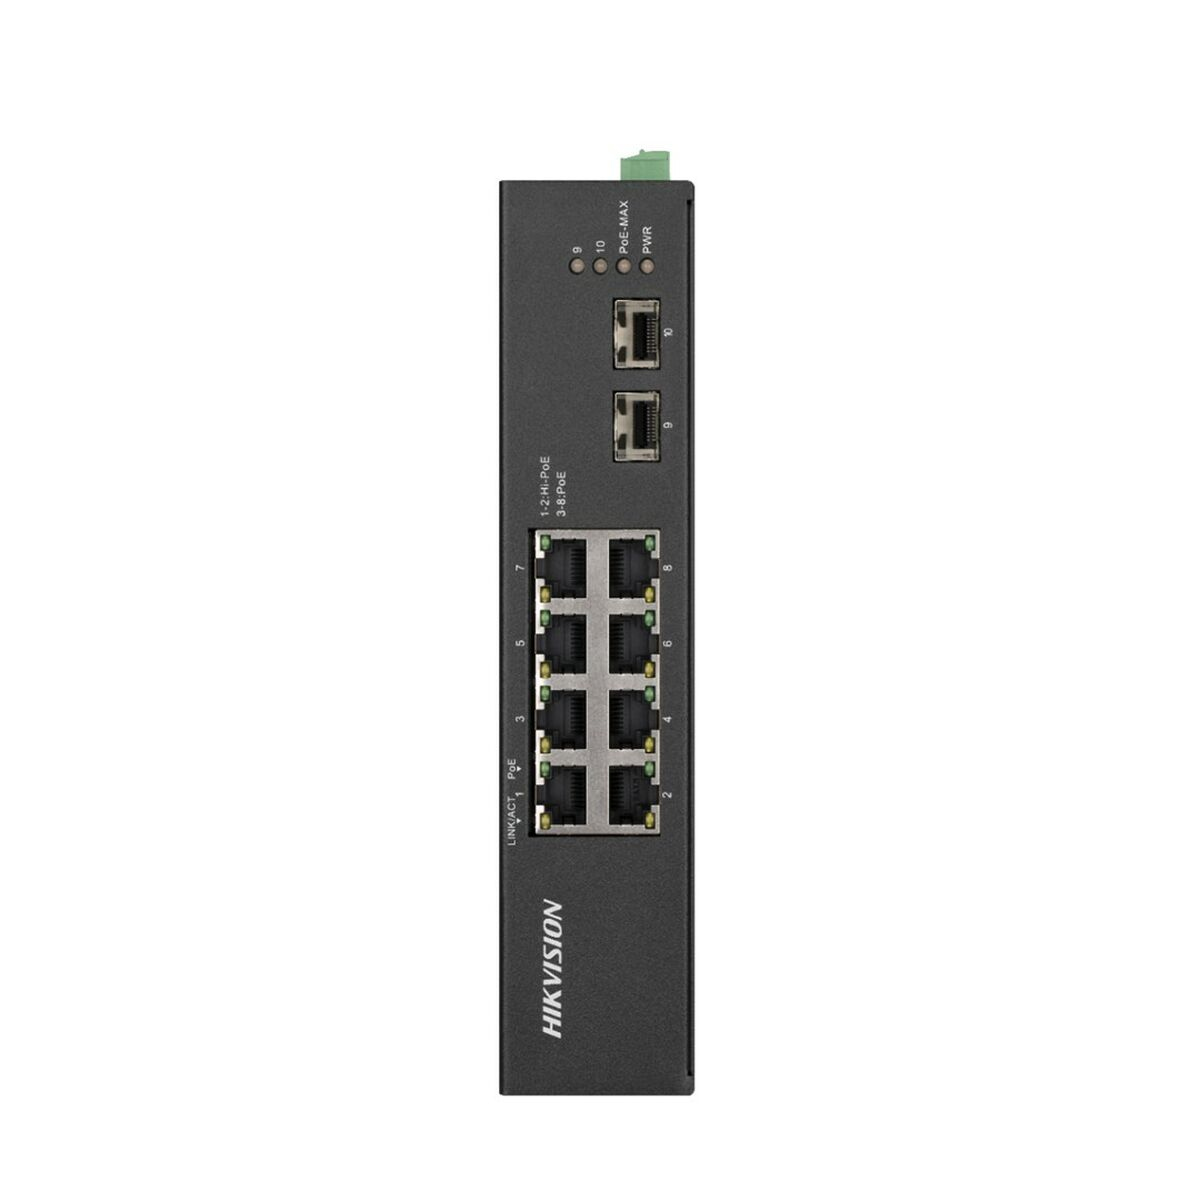 PoE-Switch mit DS-3T0510HP-E/HS 8 HIKVISION Ports Switch